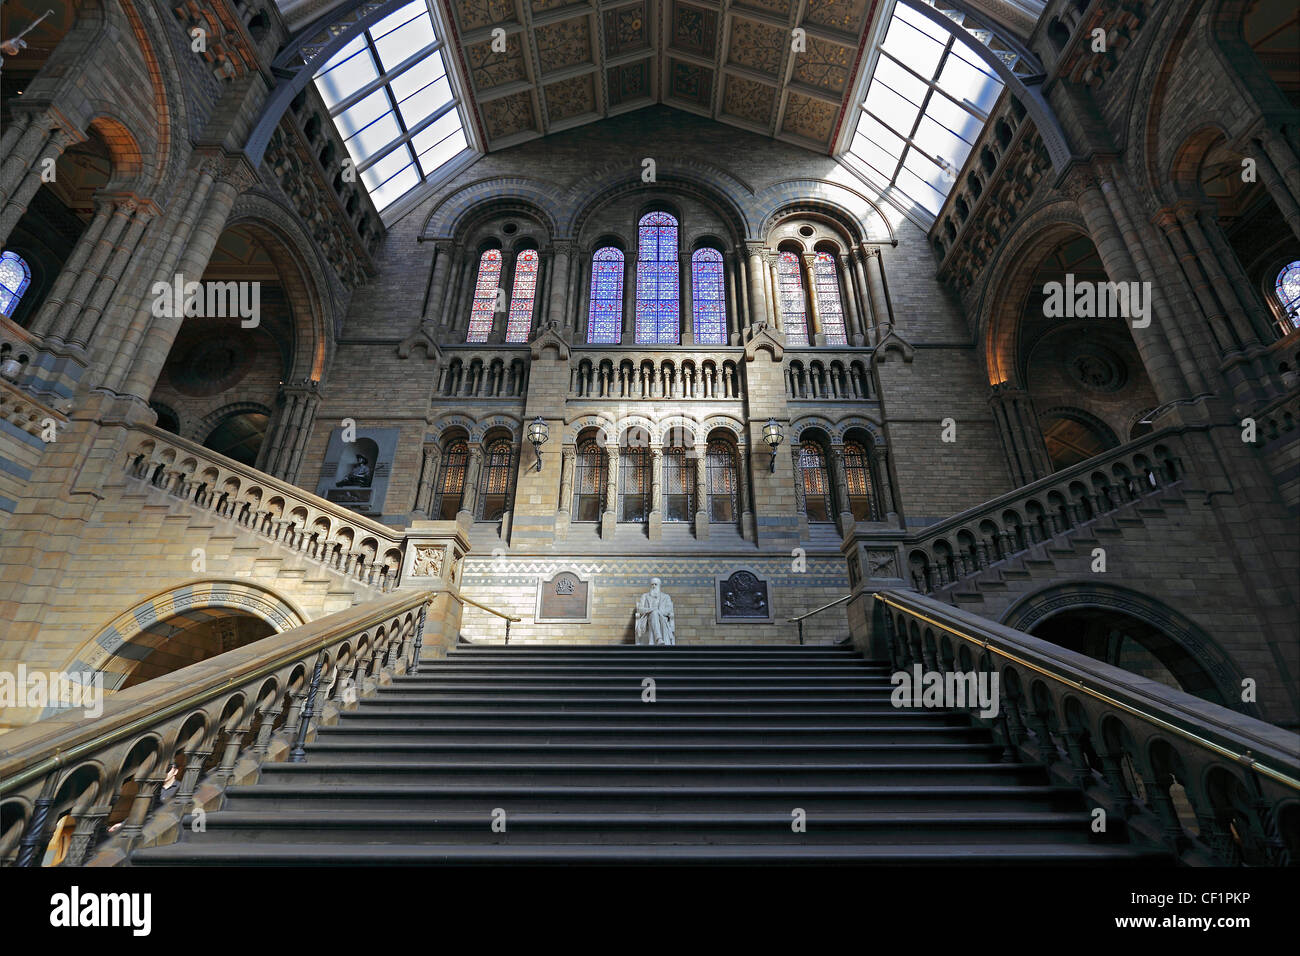 A marble statue of Charles Darwin at the top of the grand staircase in the Central Hall of the Natural History Museum. Stock Photo